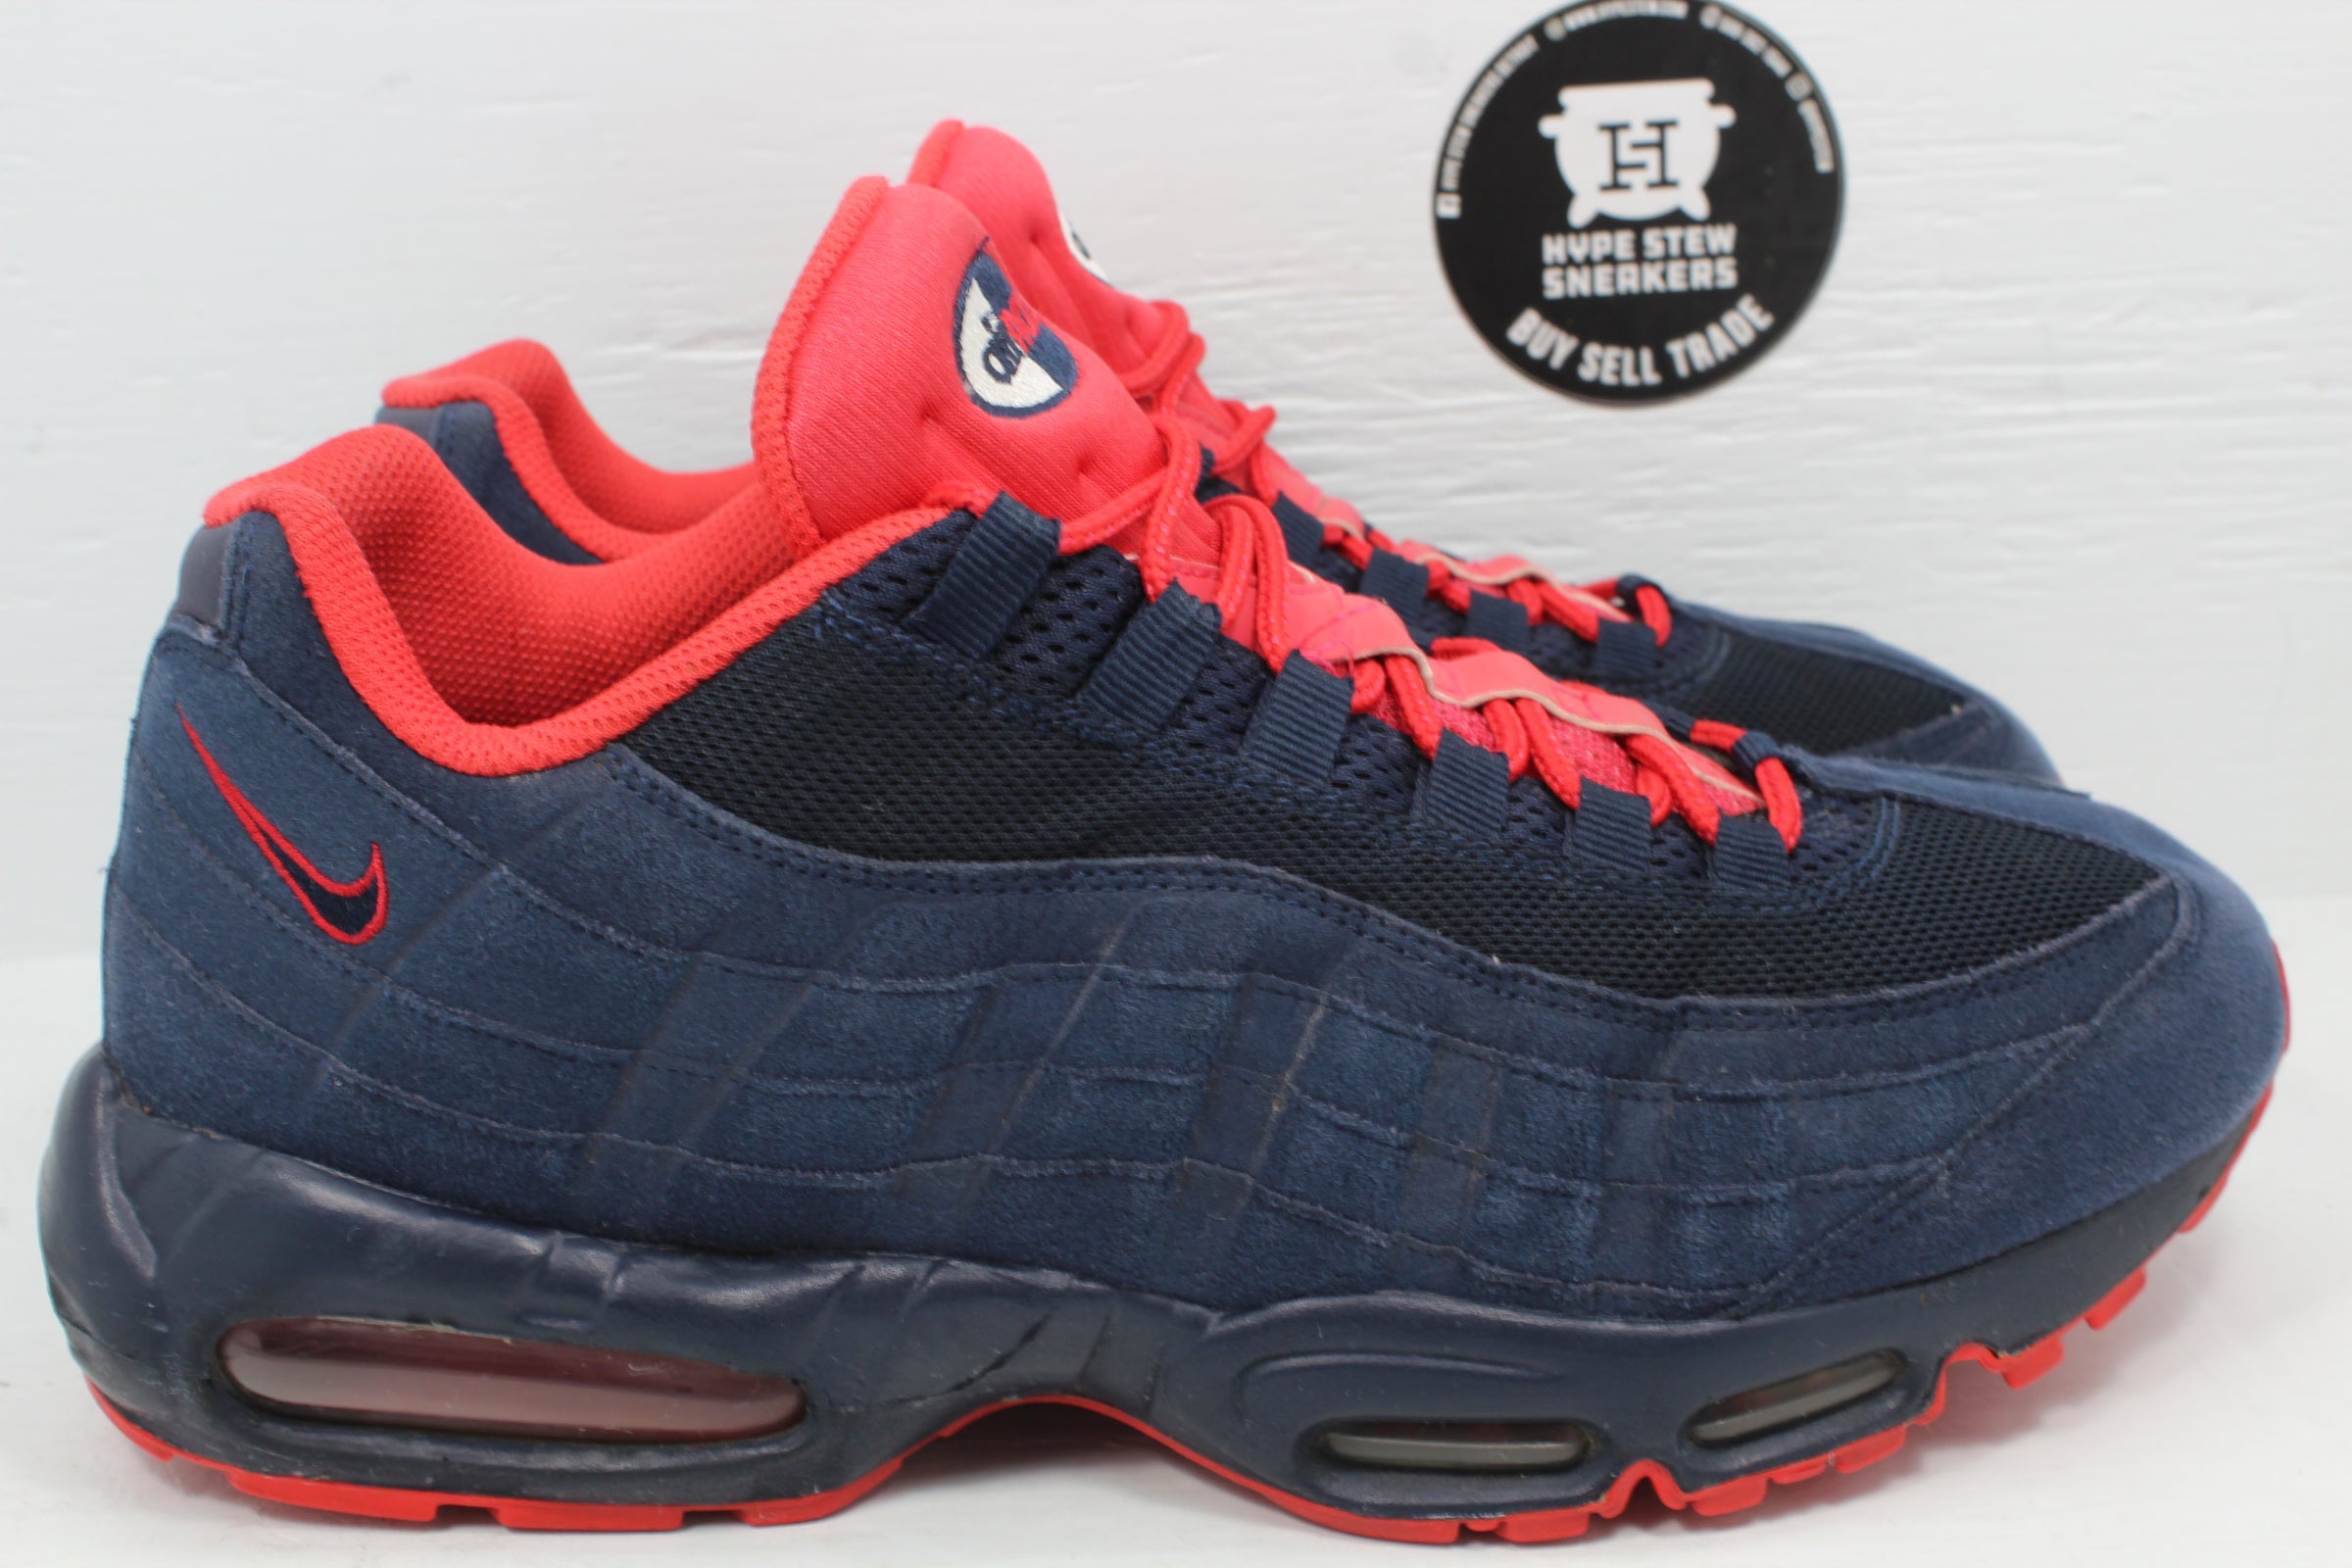 Nike Air Max 95 Obsidian Action Hype Stew Sneakers Detroit